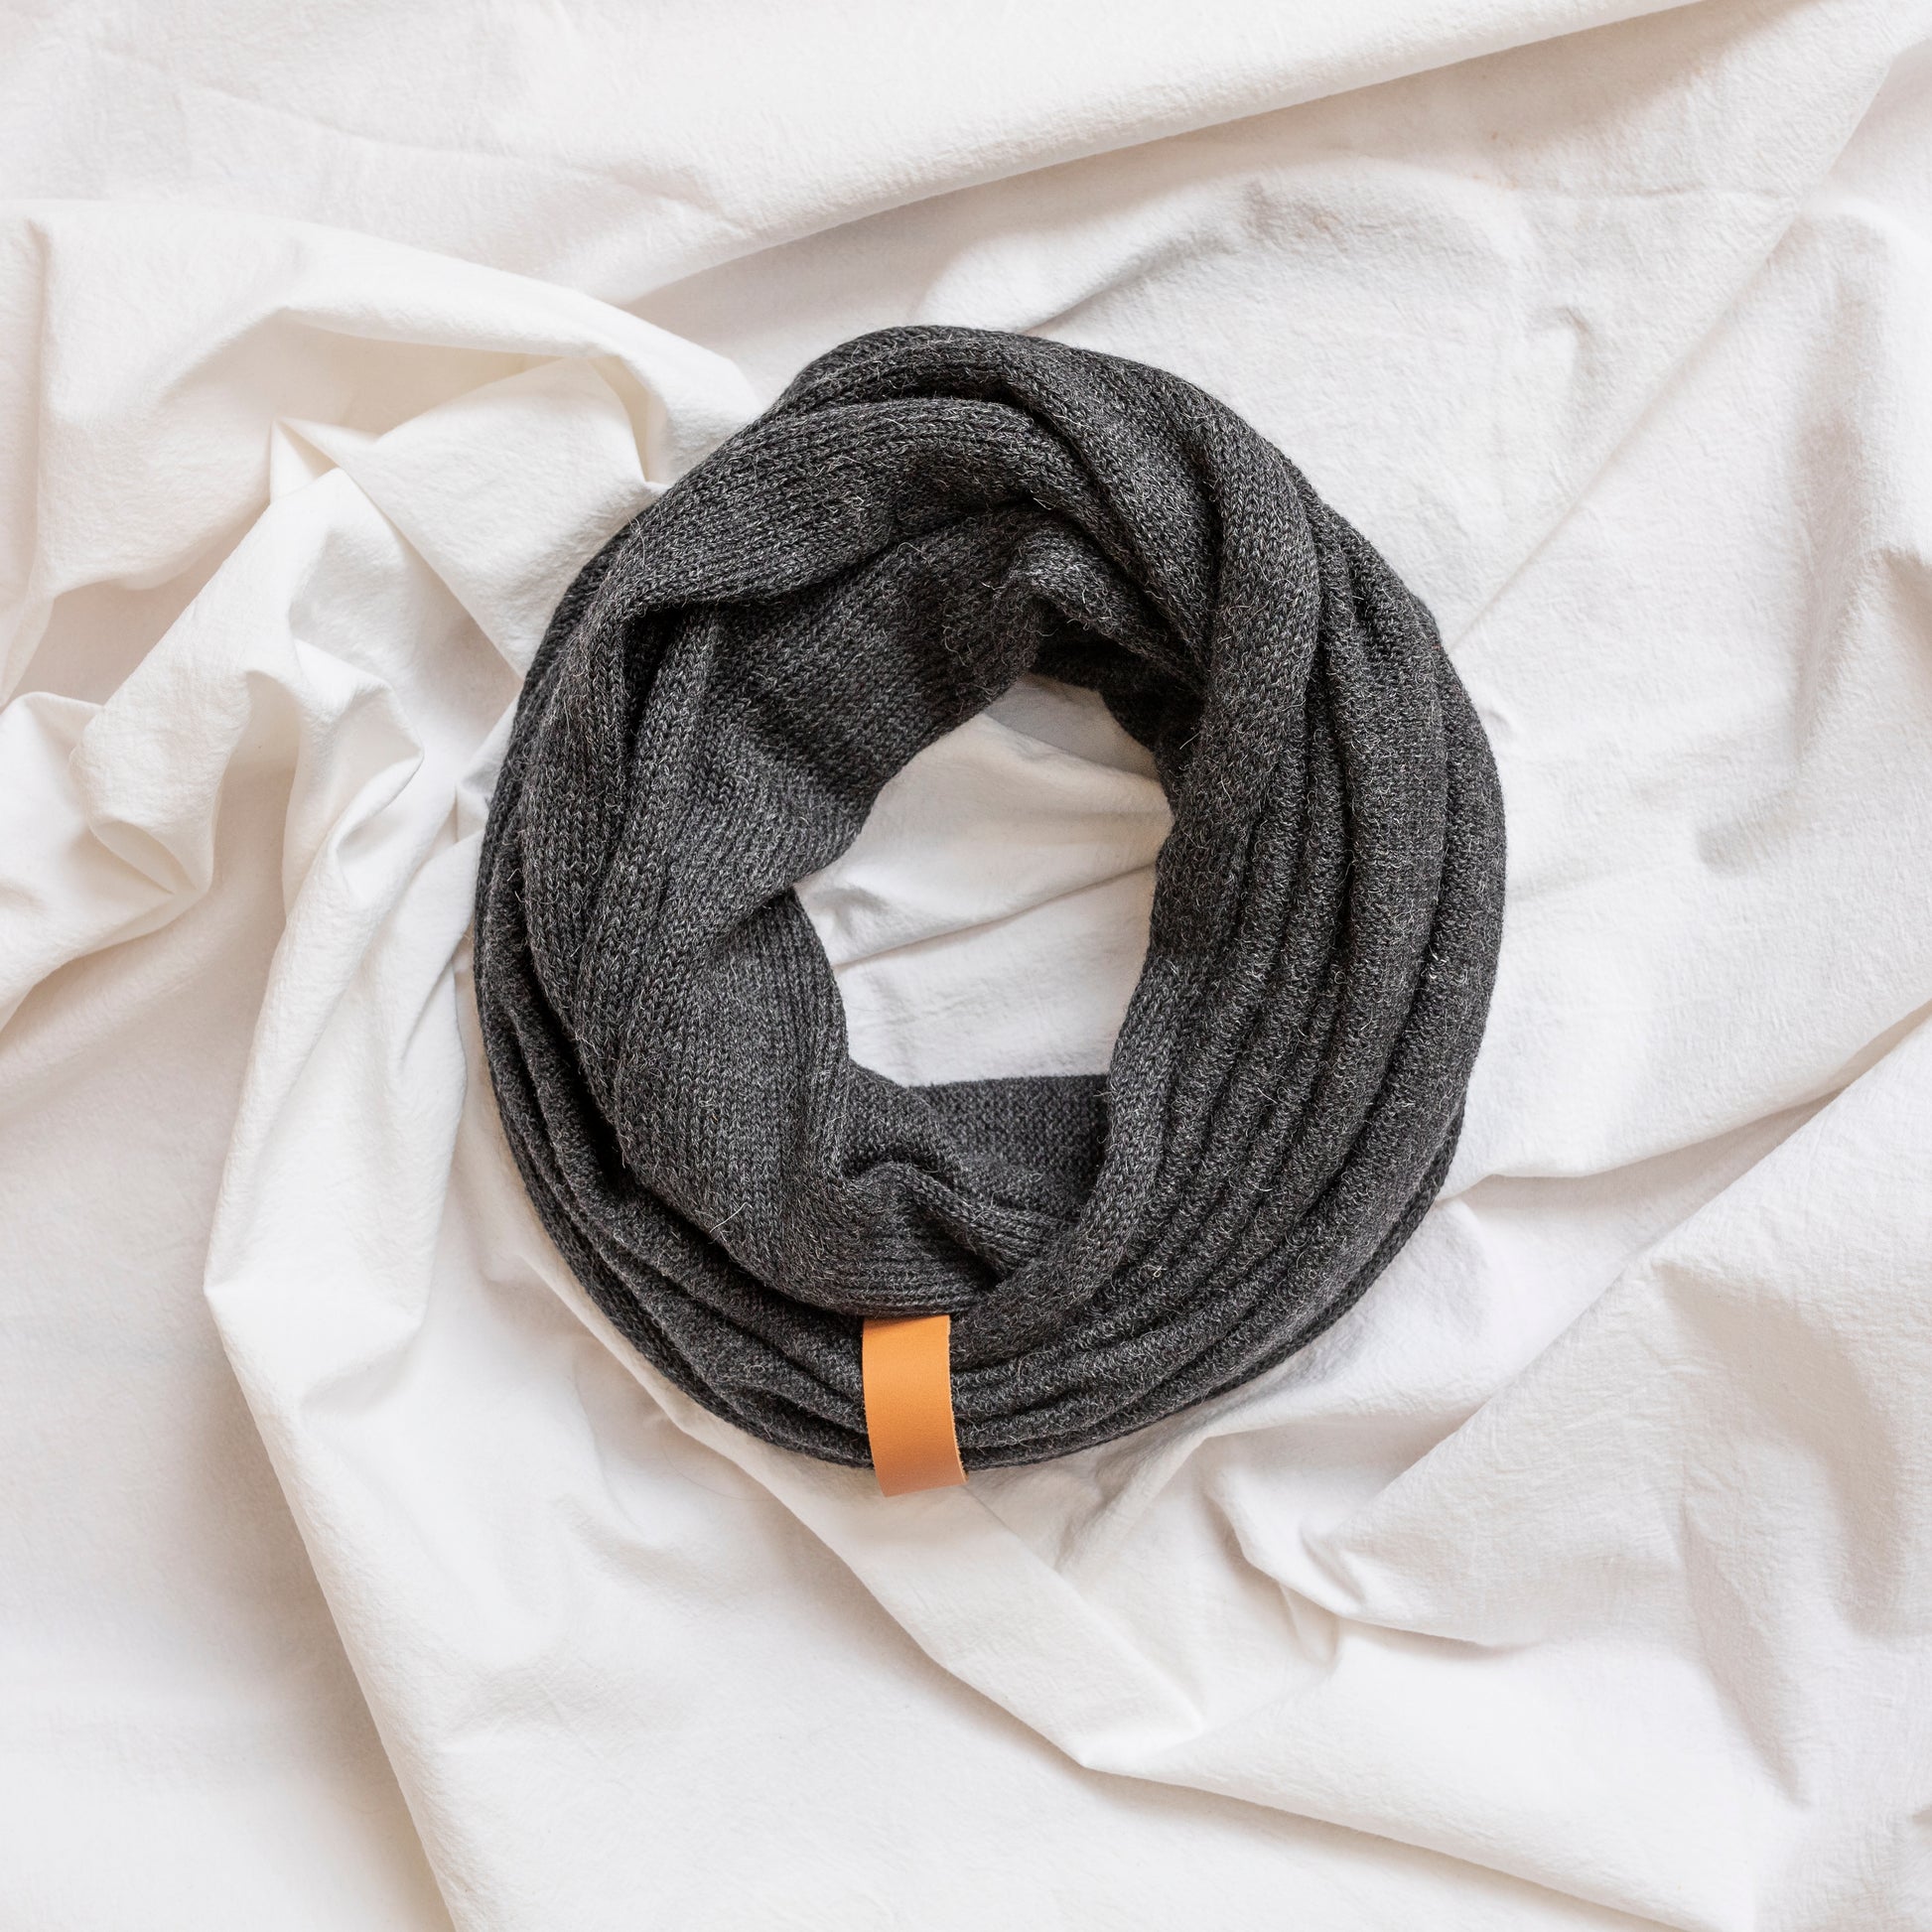 Charcoal coloured luxury infinity scarf with leather strap detail.